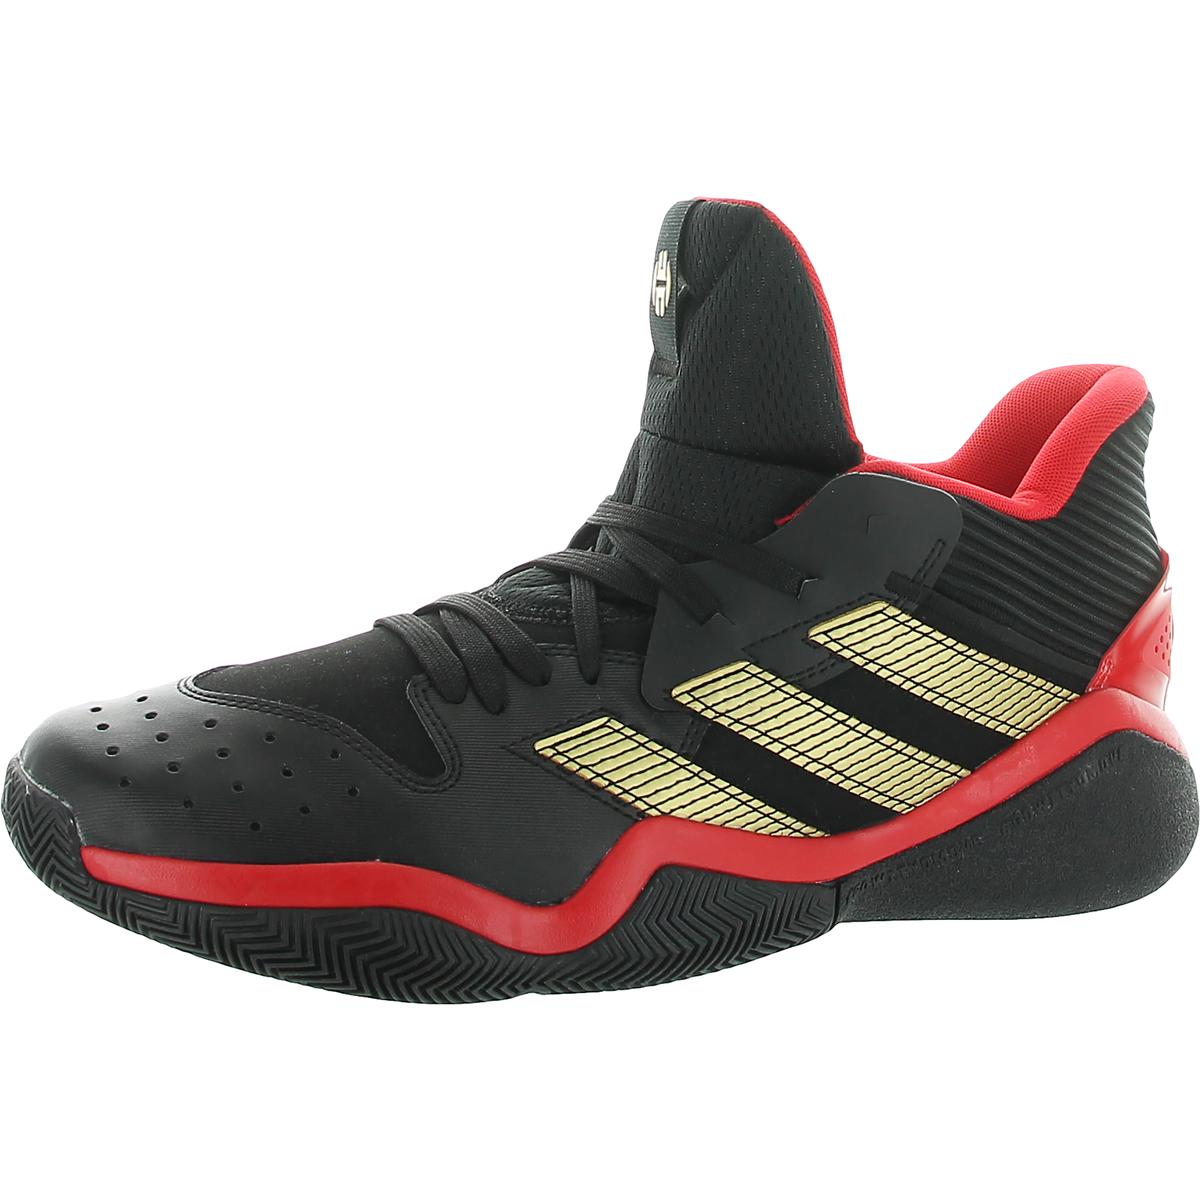 Adidas Mens Harden Stepback Faux Leather Sneakers Basketball Shoes BHFO 9047 | eBay